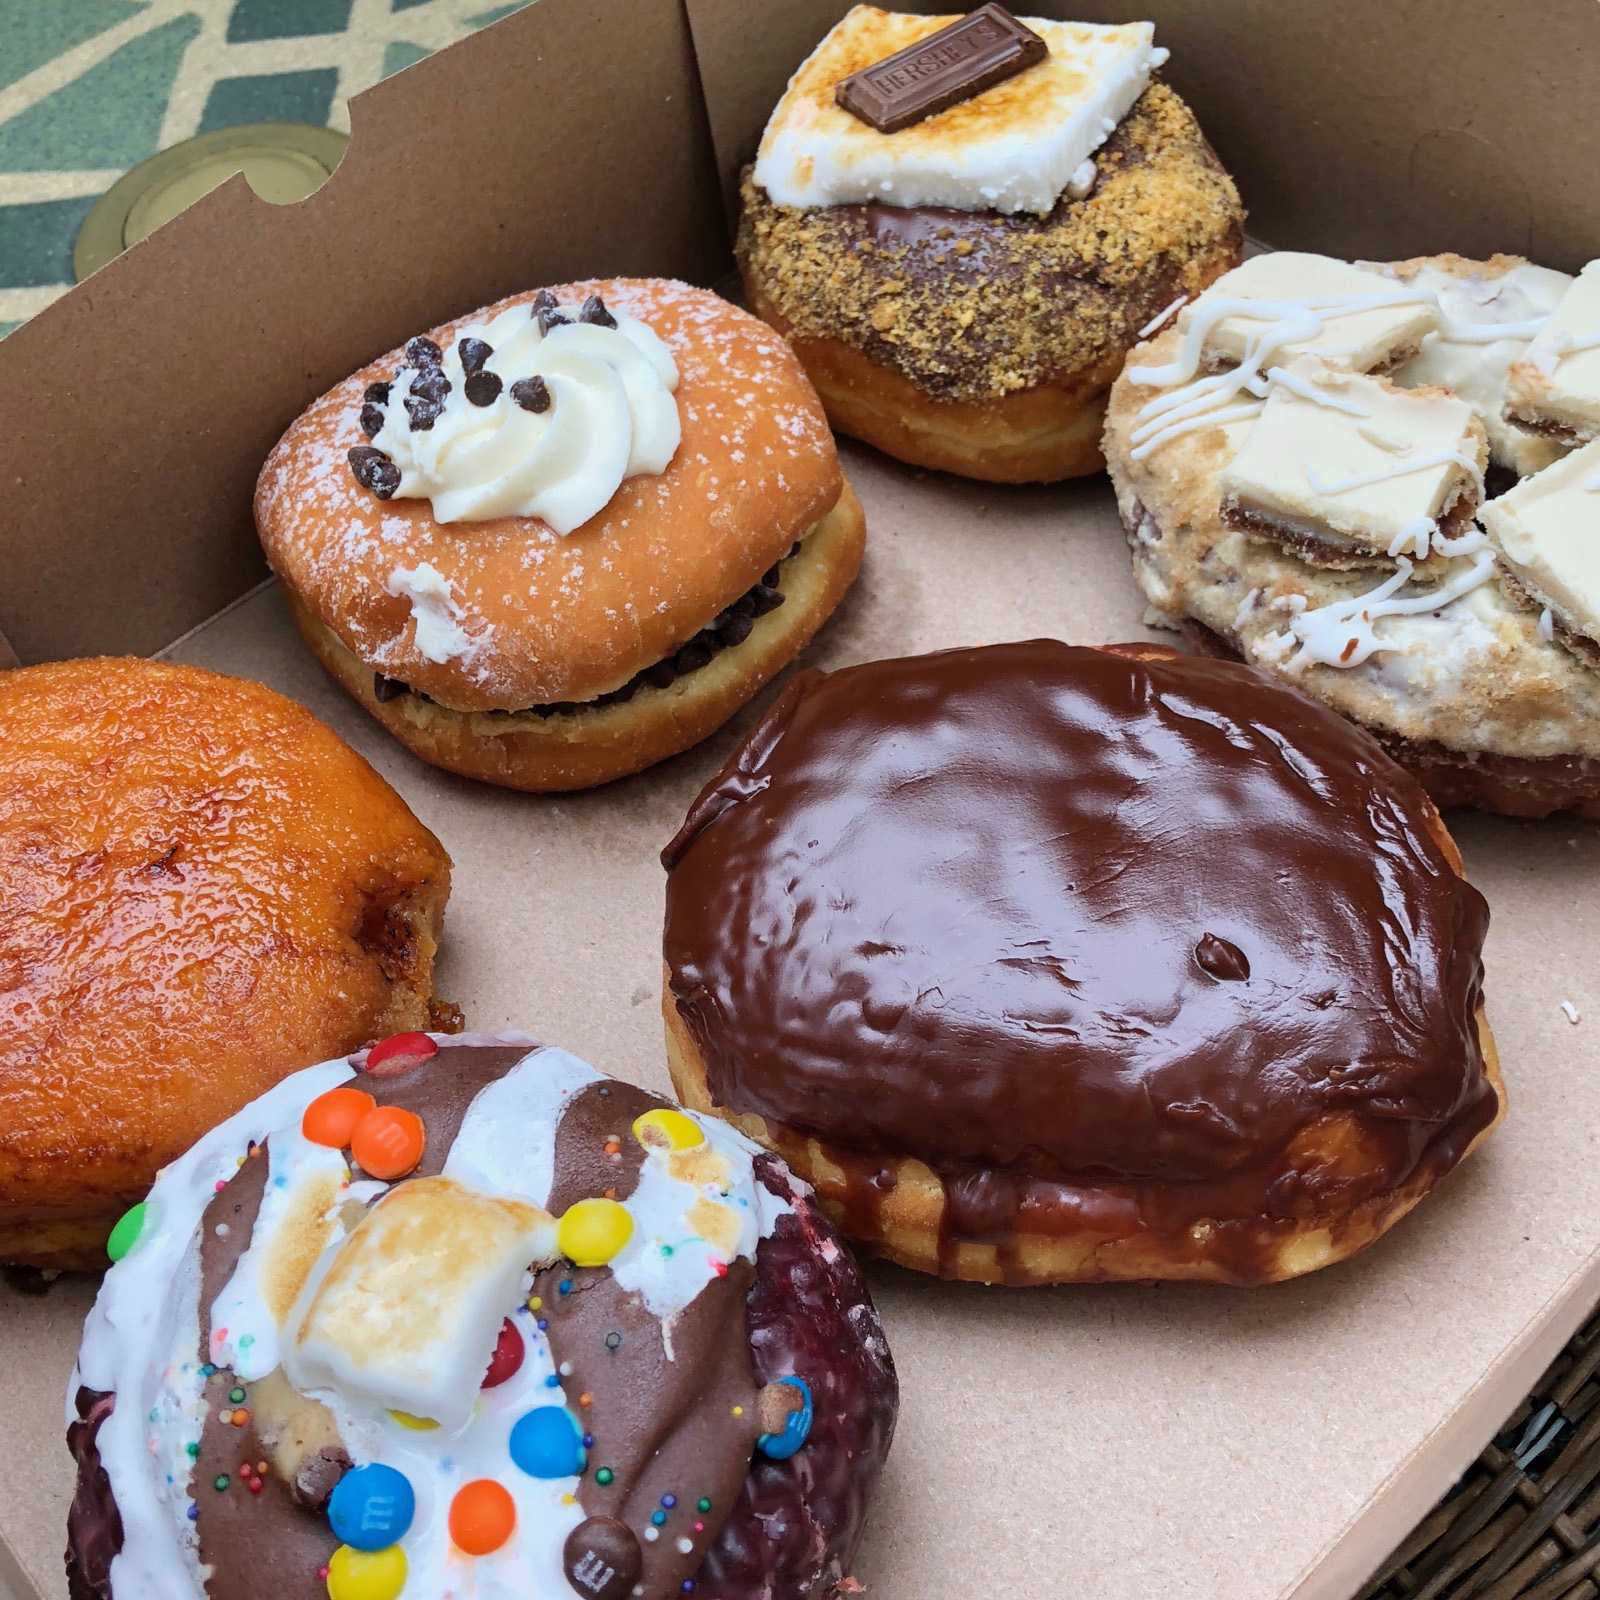 A box of 6 donuts of all different flavors from Crazy Donuts in Connecticut.